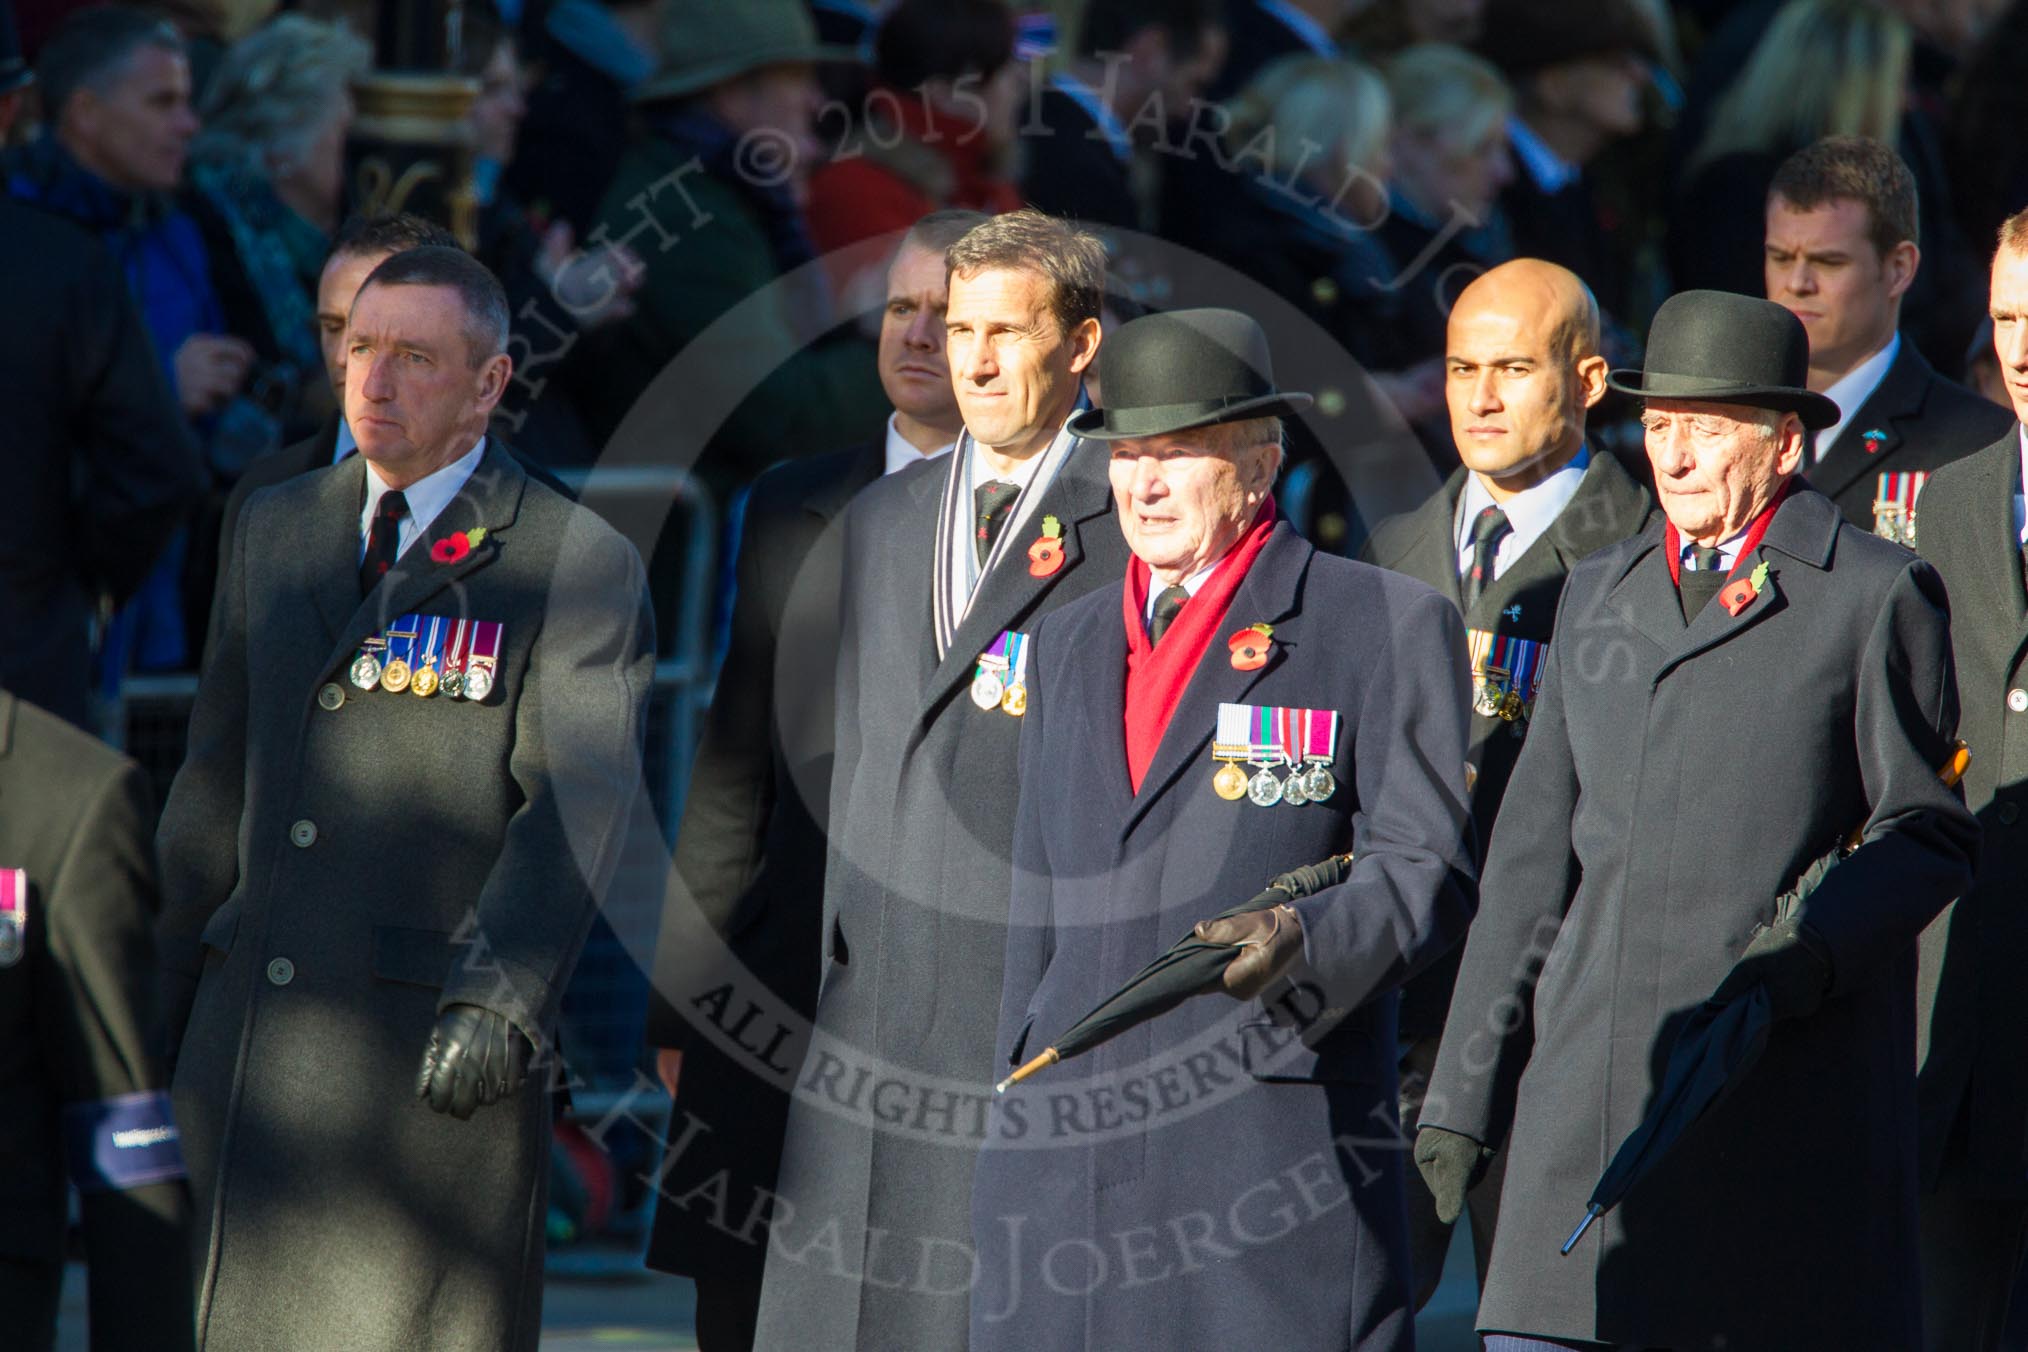 Remembrance Sunday Cenotaph March Past 2013: B38 - Royal Army Physical Training Corps..
Press stand opposite the Foreign Office building, Whitehall, London SW1,
London,
Greater London,
United Kingdom,
on 10 November 2013 at 12:04, image #1627